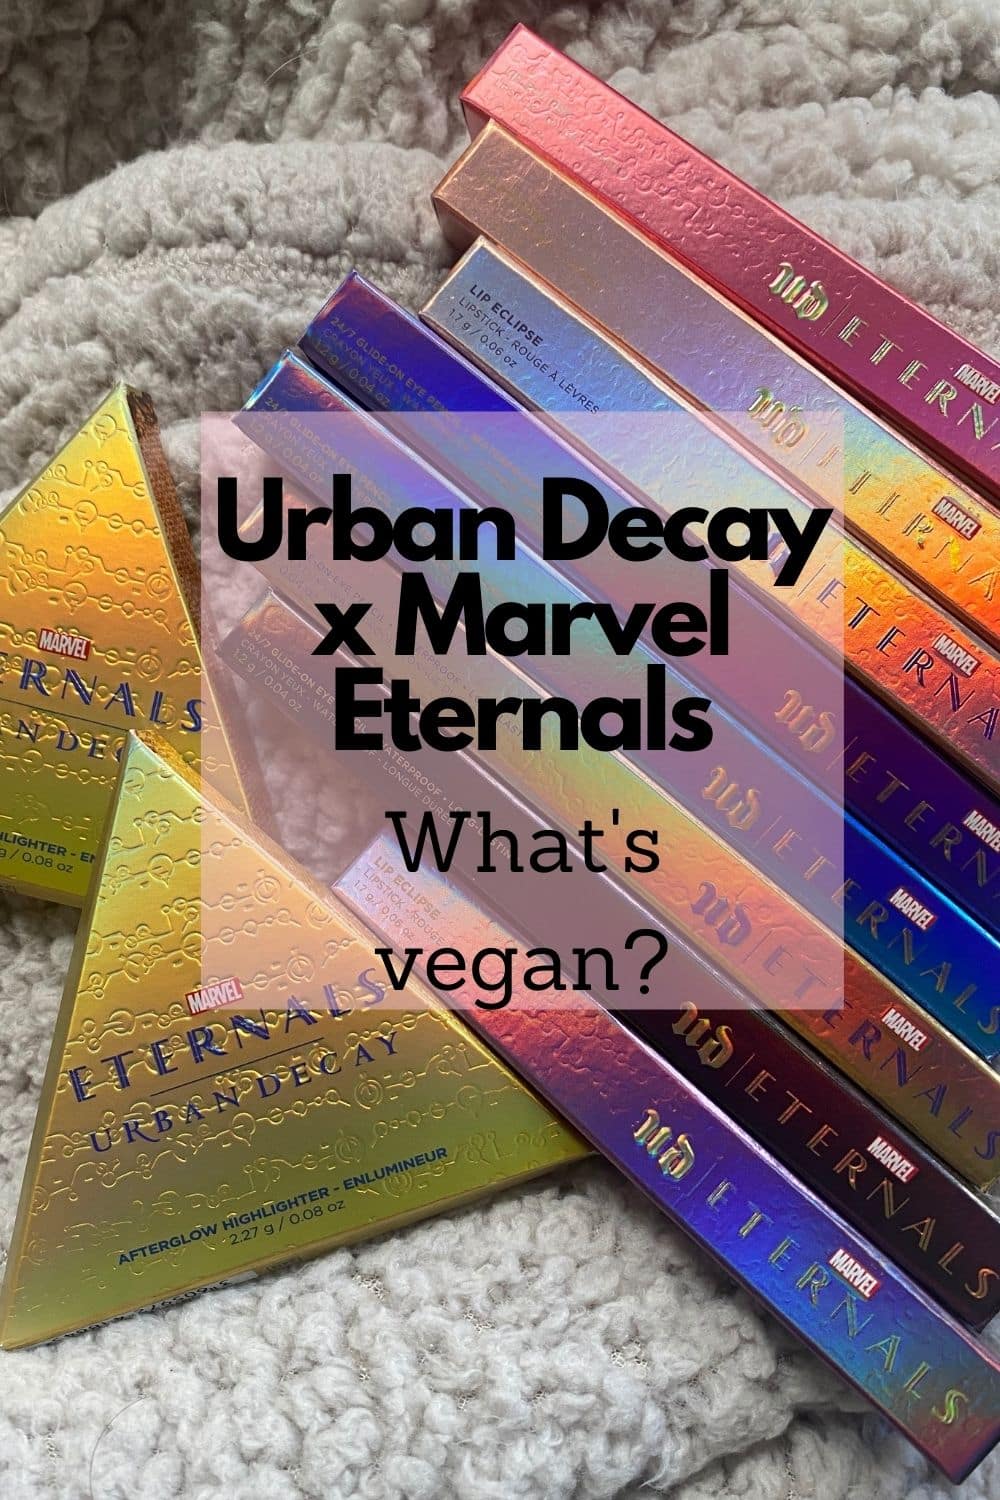 Urban Decay Eternals Collection – What’s Vegan?